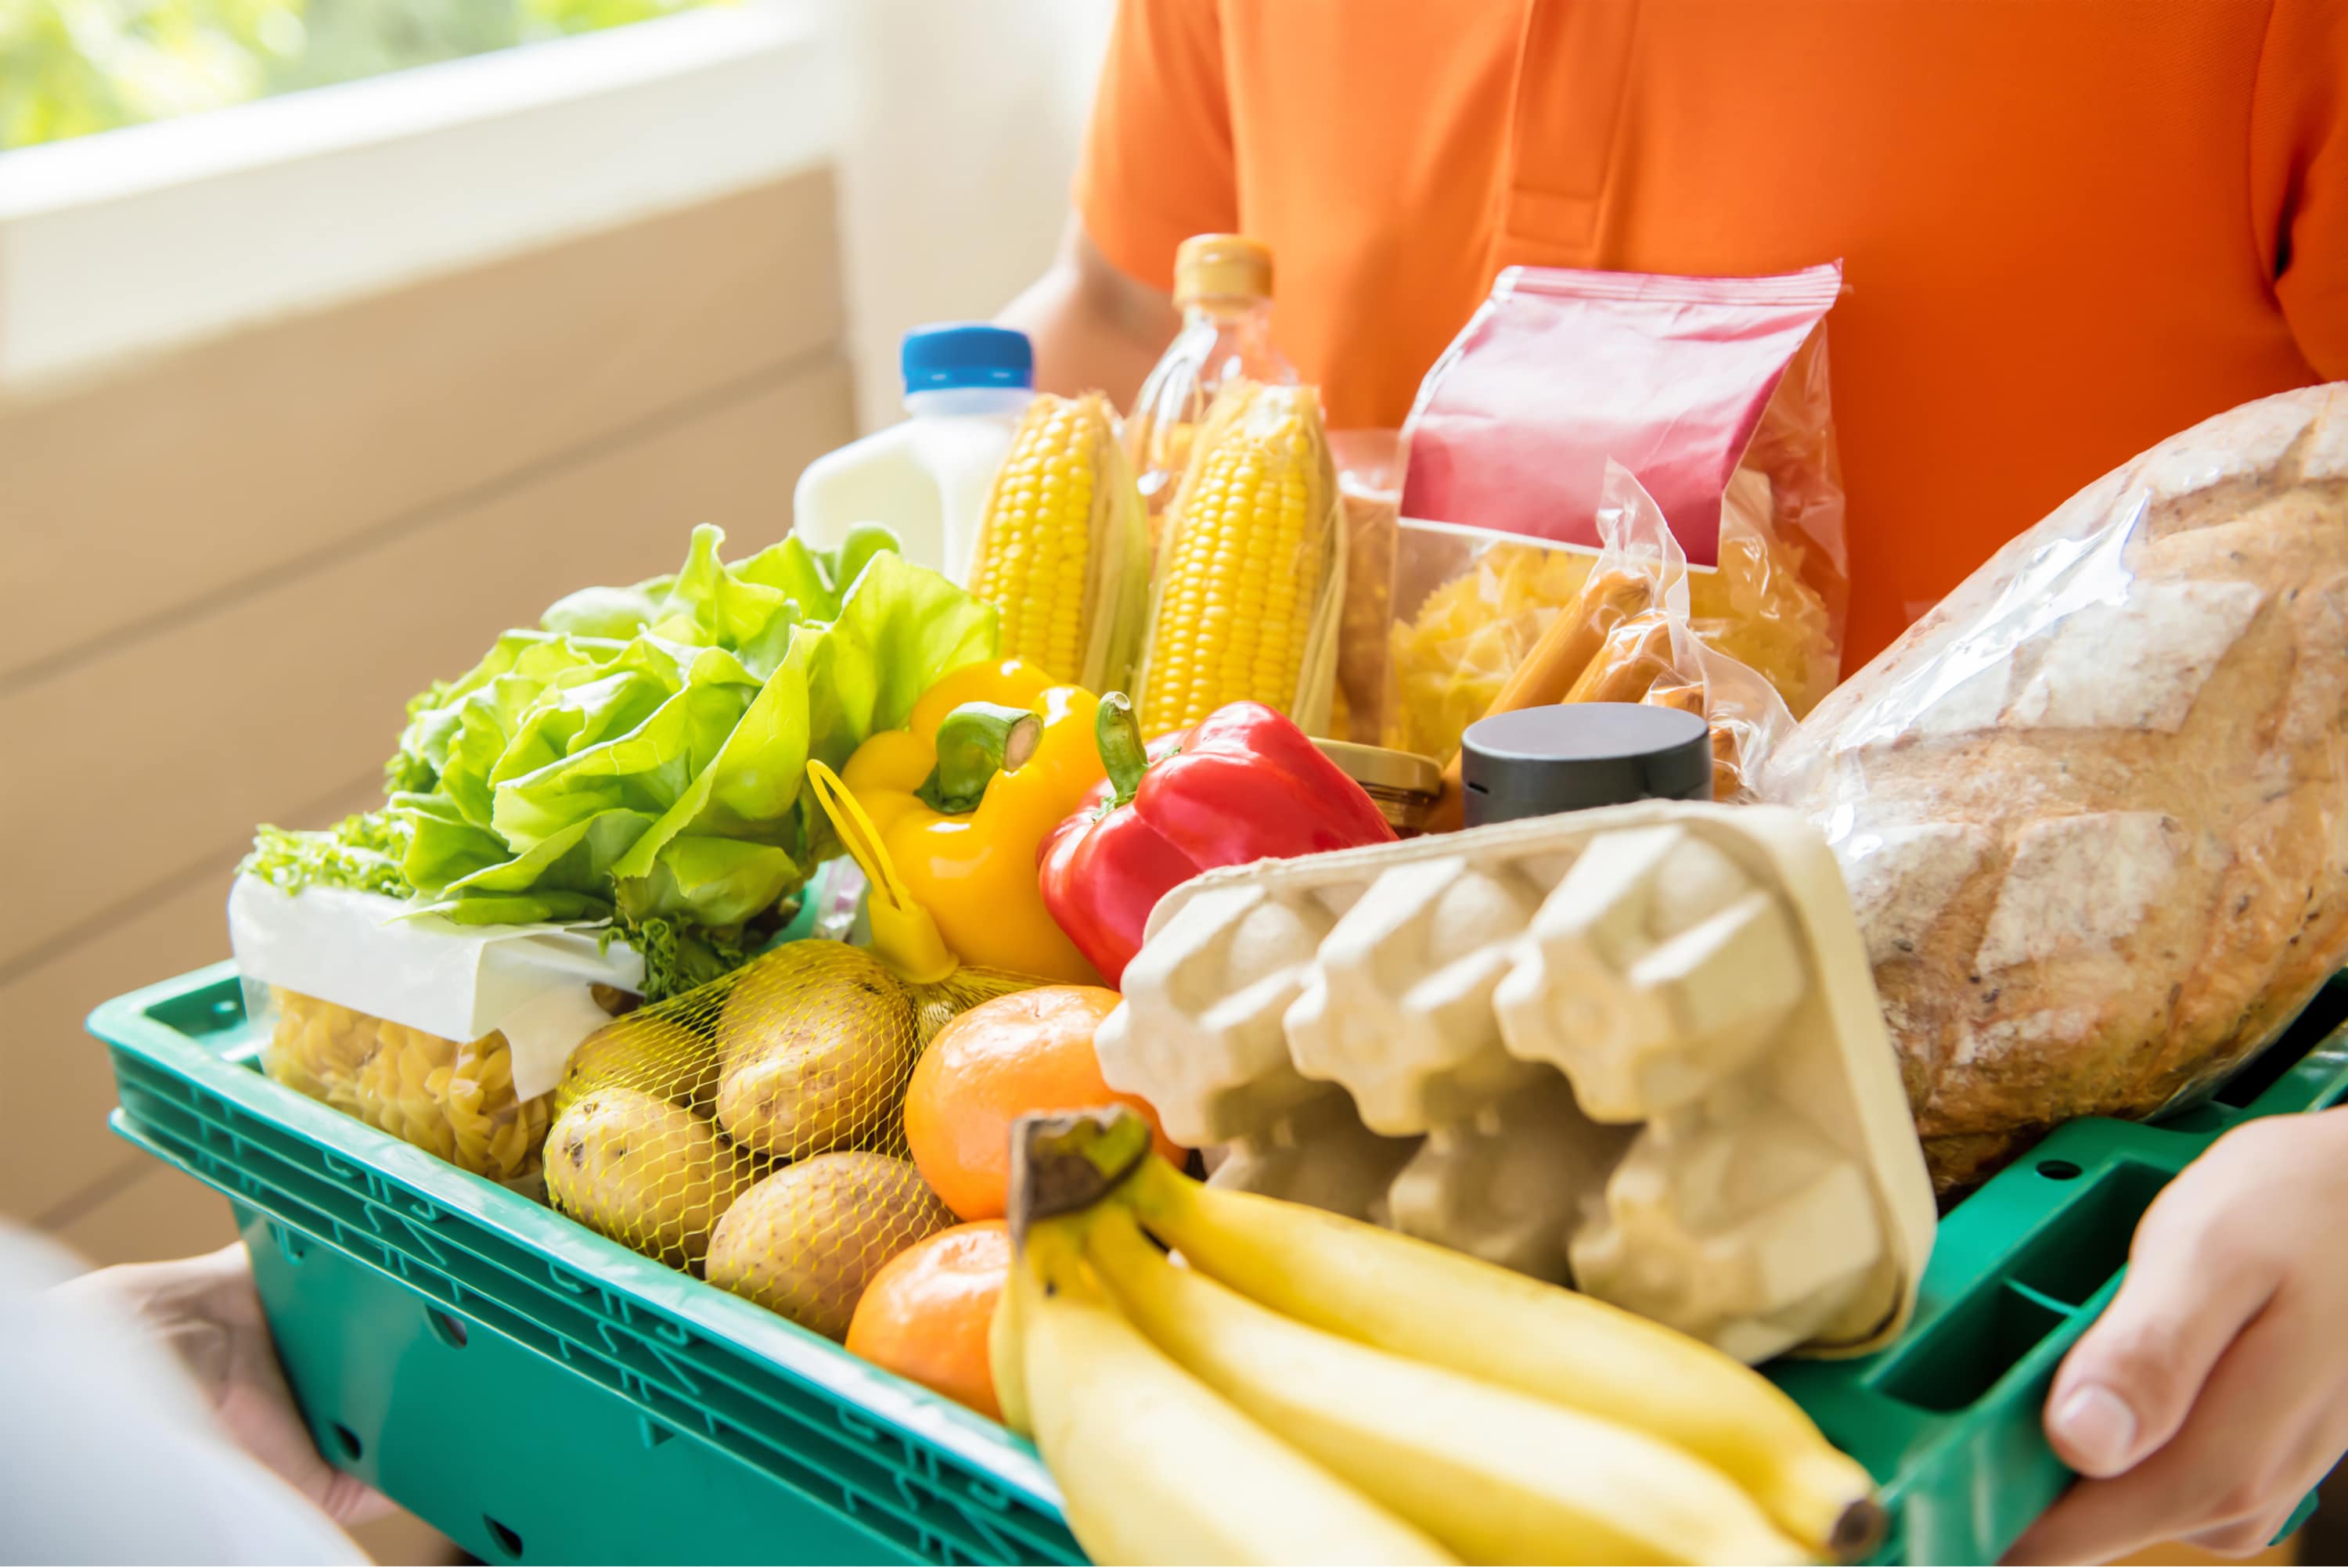 Grocery Delivery Services – How They Work, Cost & Benefits